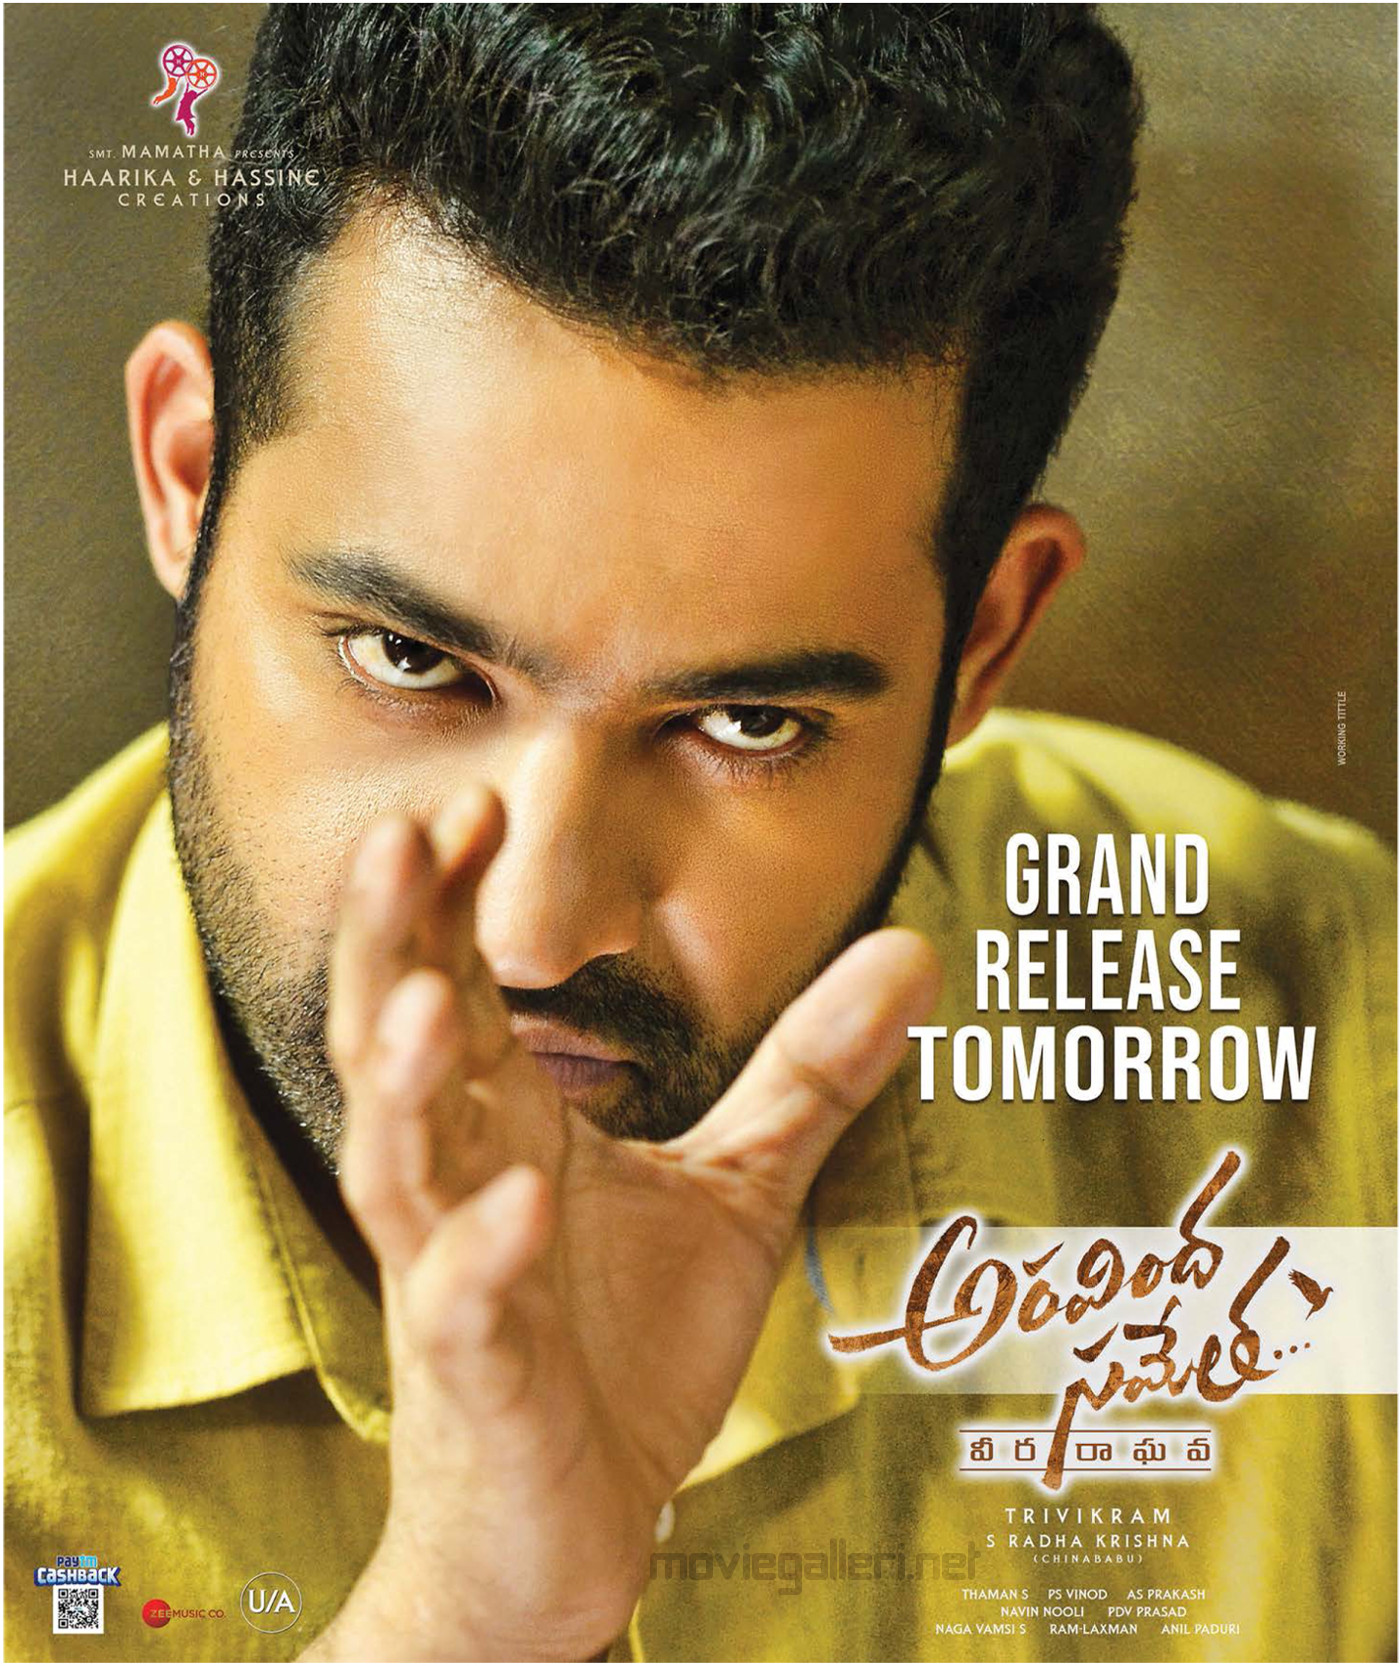 First Look Poster Of Jr NTR As Komaram Bheem Will Be Out Soon!